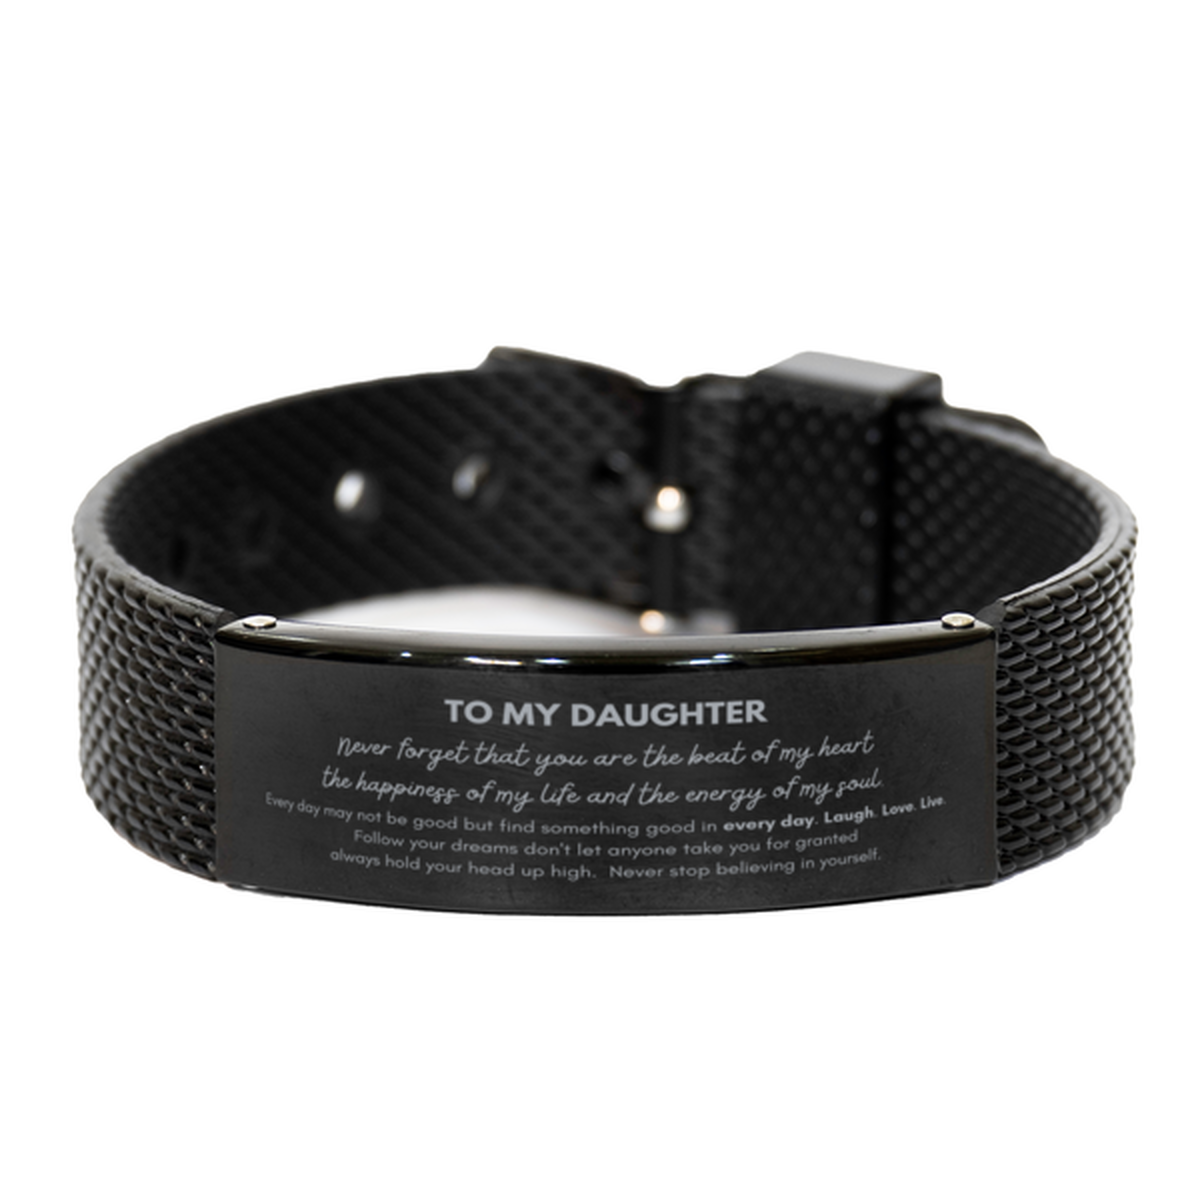 To My Daughter Bracelet Gifts, Christmas Daughter Black Shark Mesh Bracelet Present, Birthday Unique Motivational For Daughter, To My Daughter Never forget that you are the beat of my heart the happiness of my life and the energy of my soul